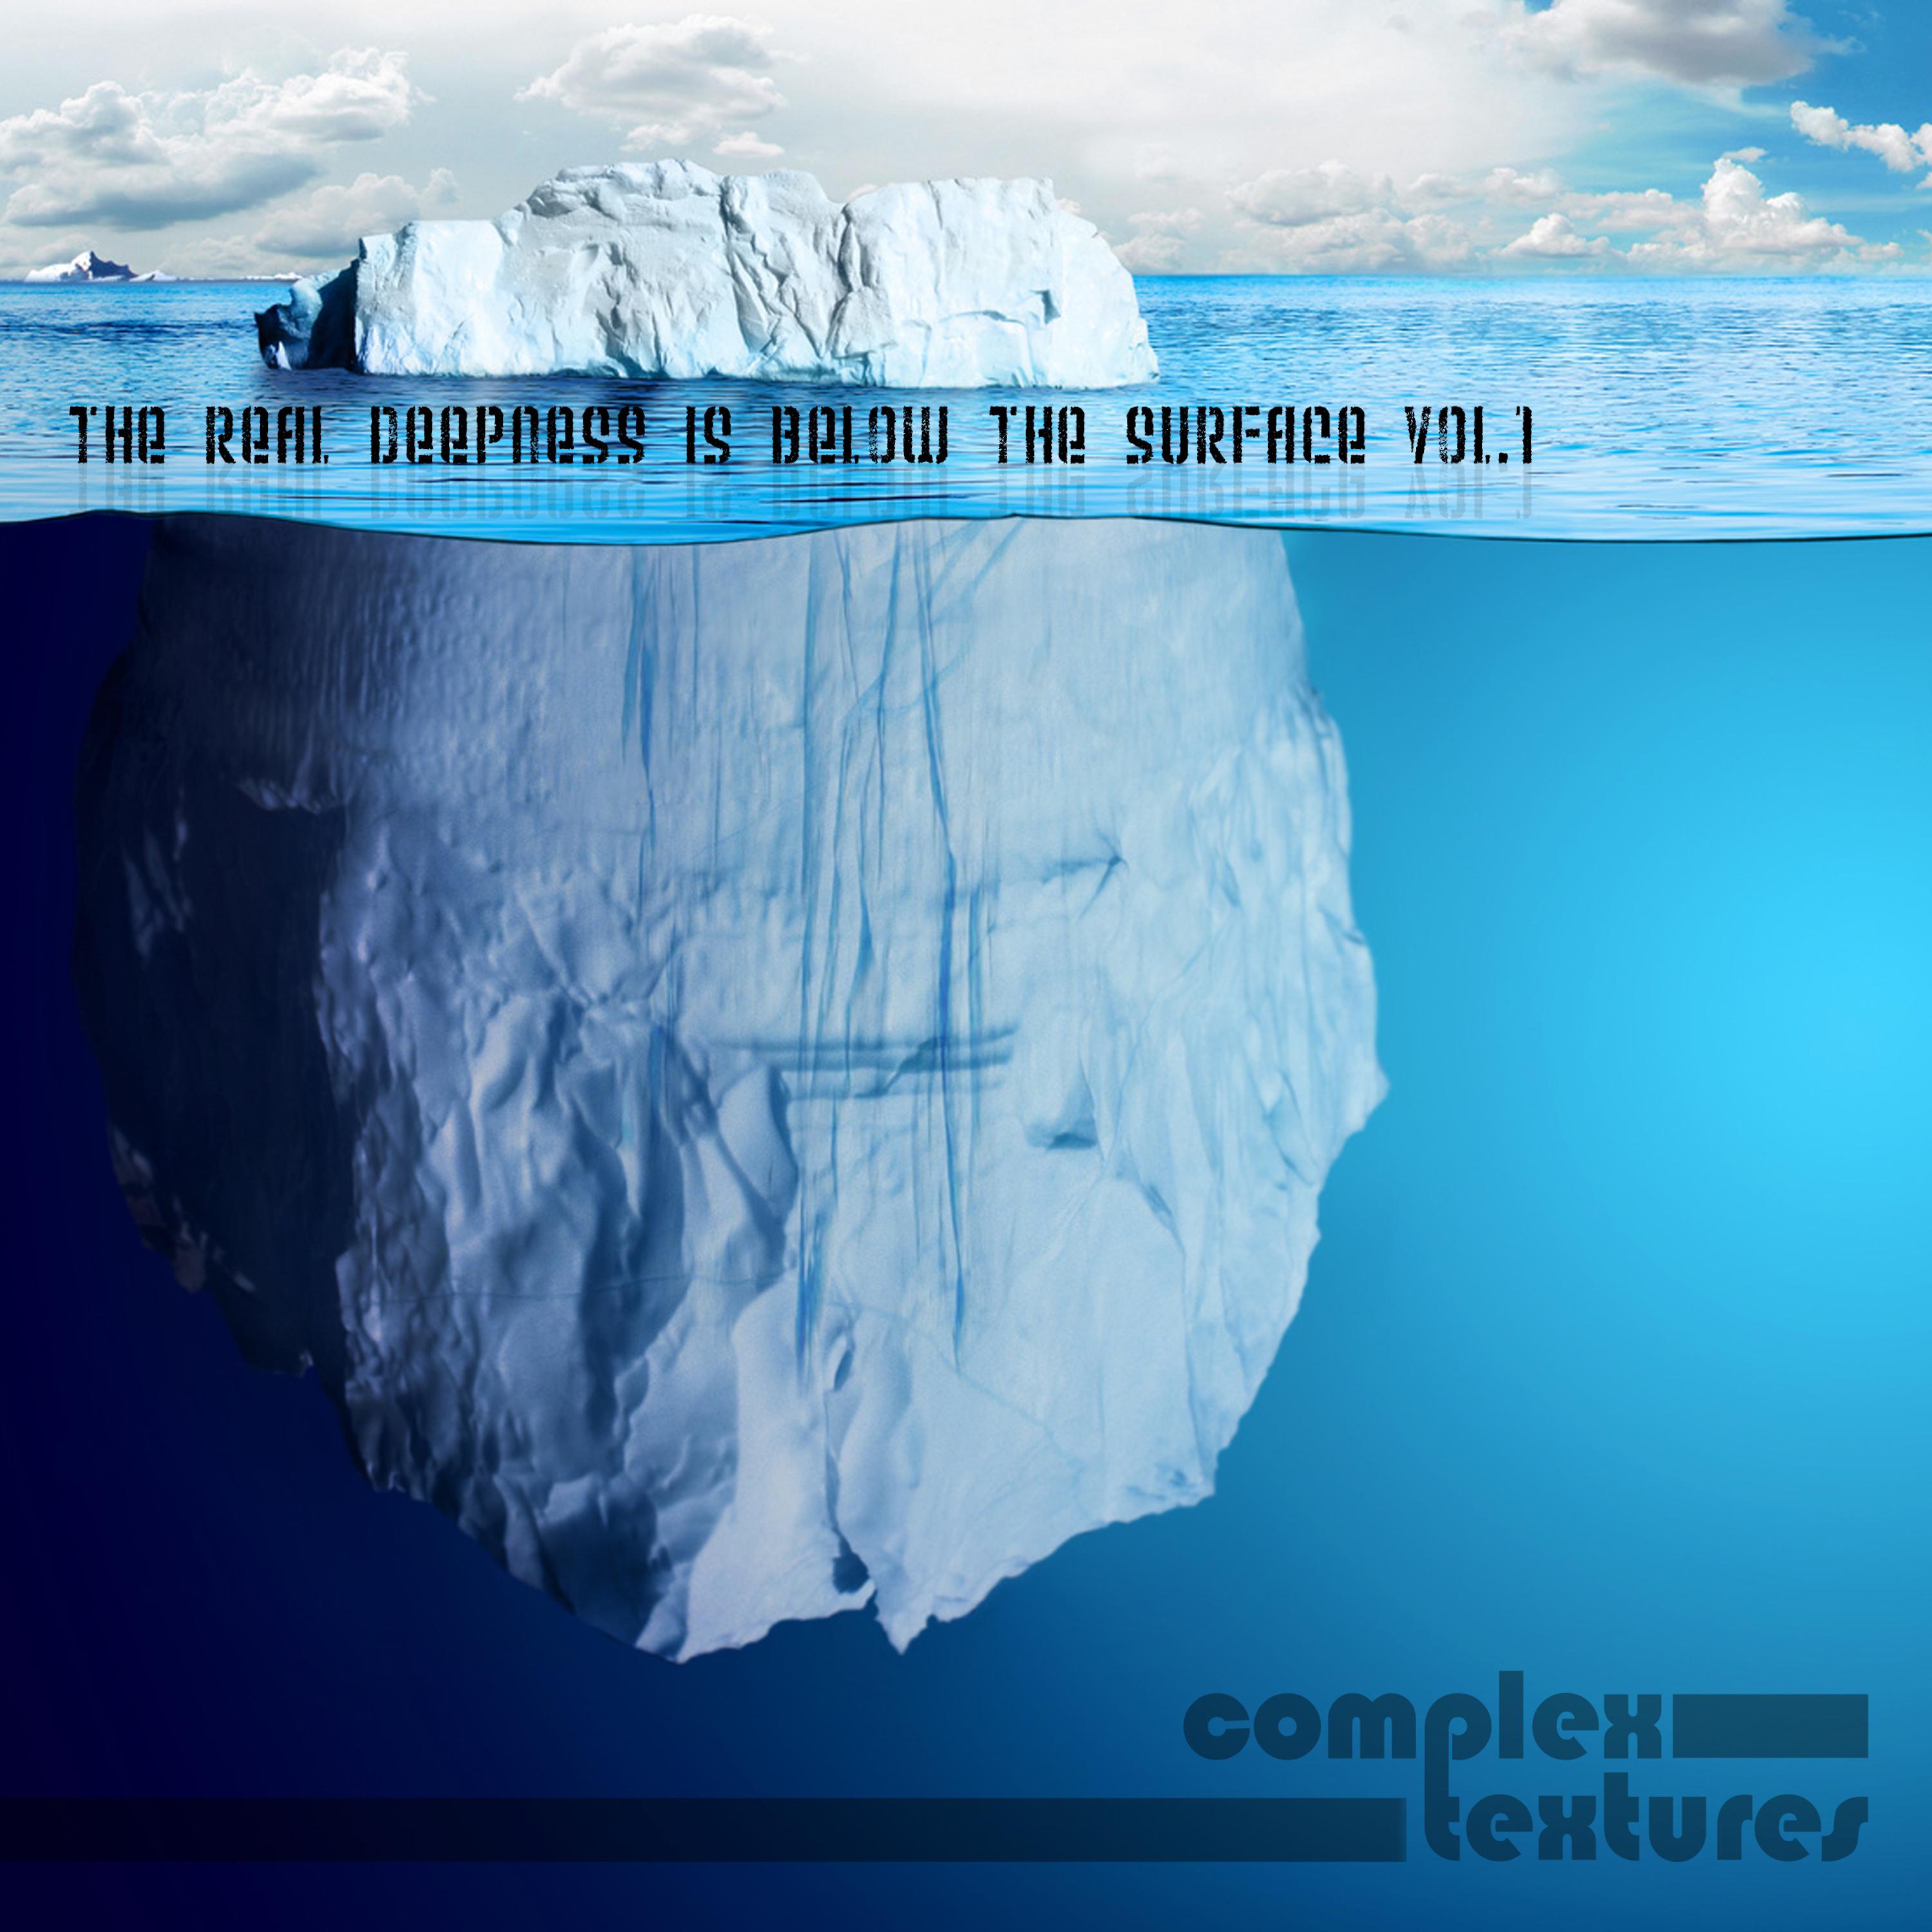 The Real Deepness is Below the Surface, Vol. 1